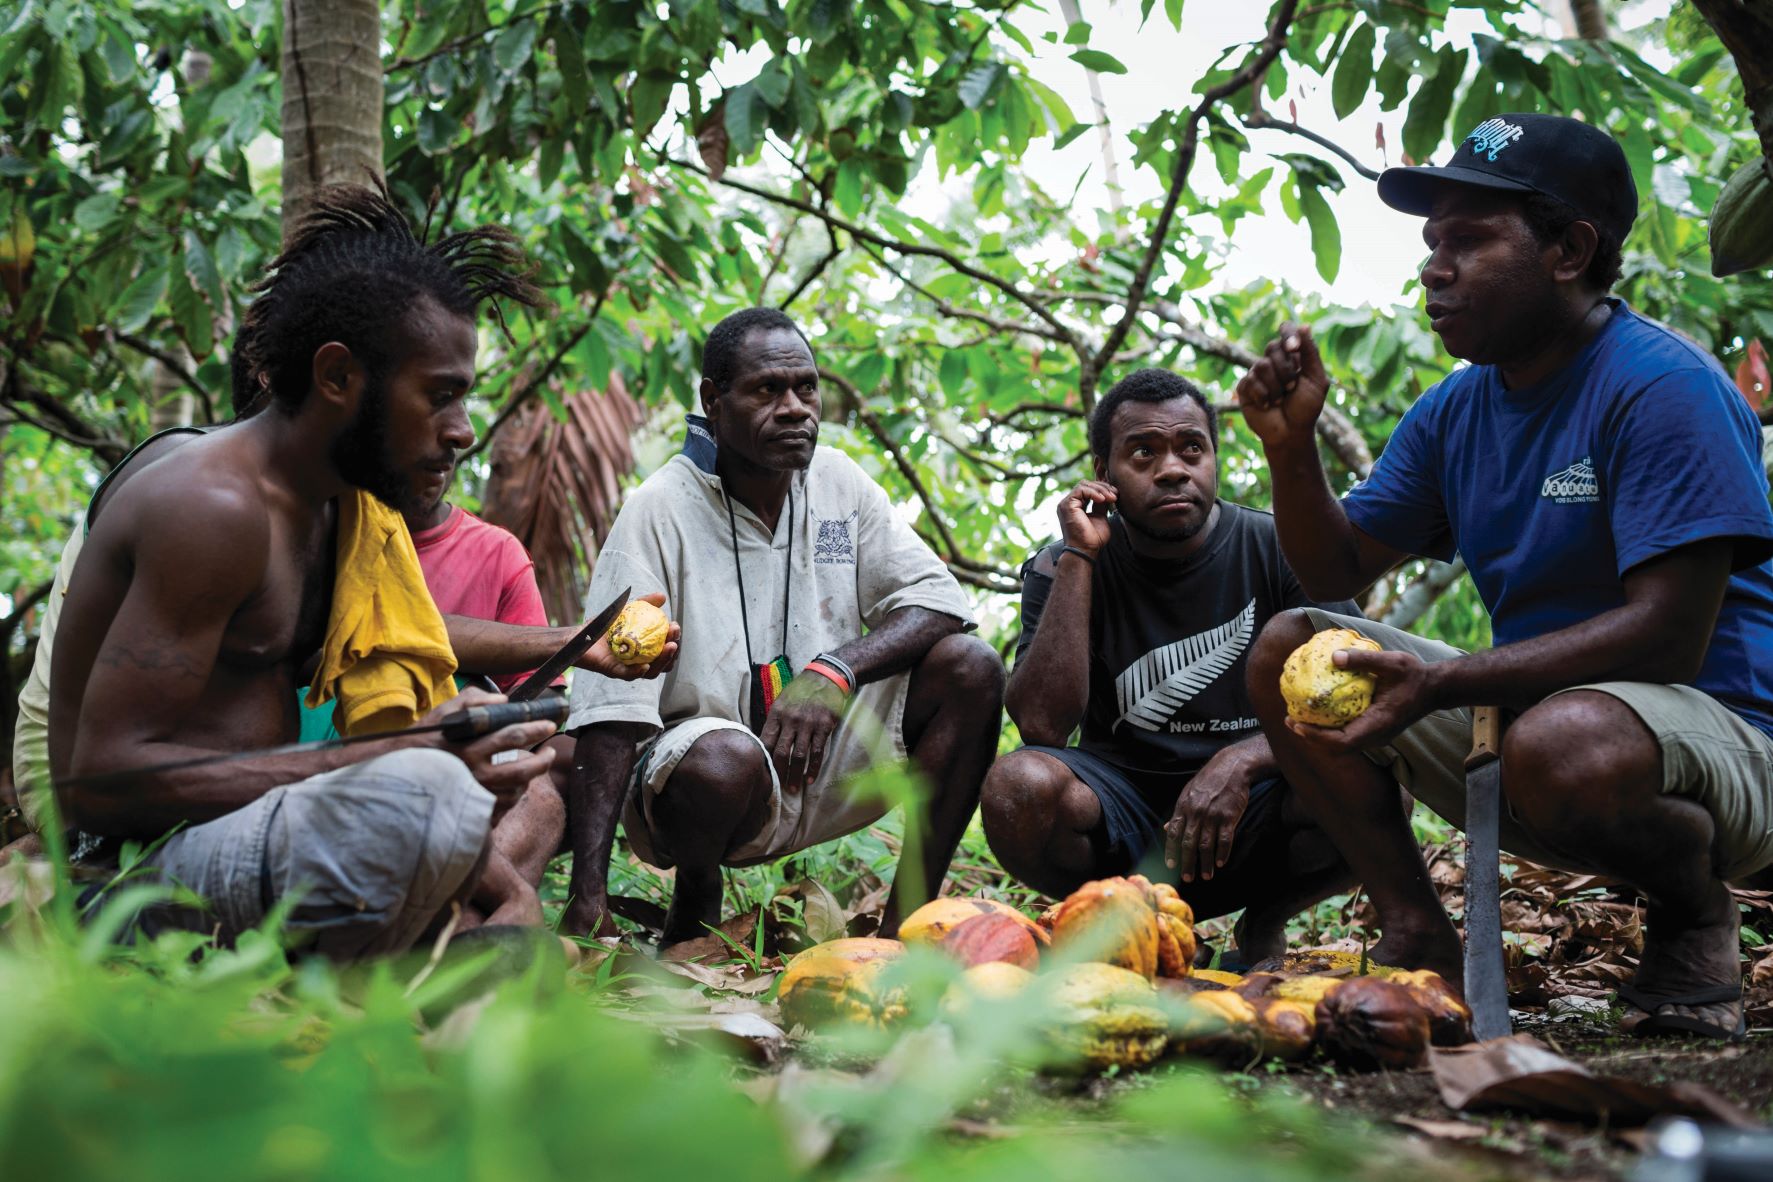 men crouching and holding cocoa pods